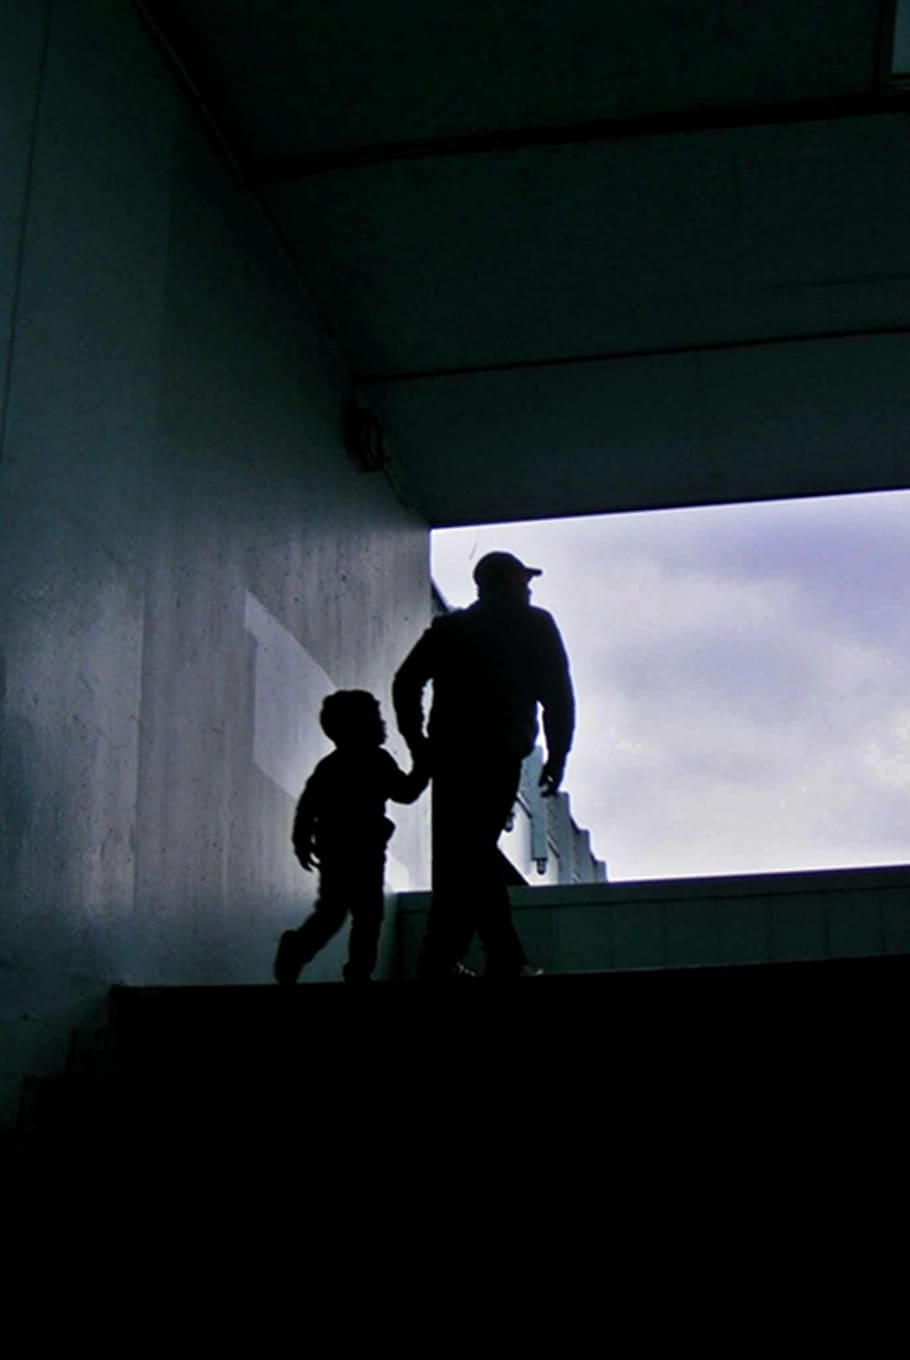 dad, child, commitment, fog, cold, walking, run, people, silhouette, men